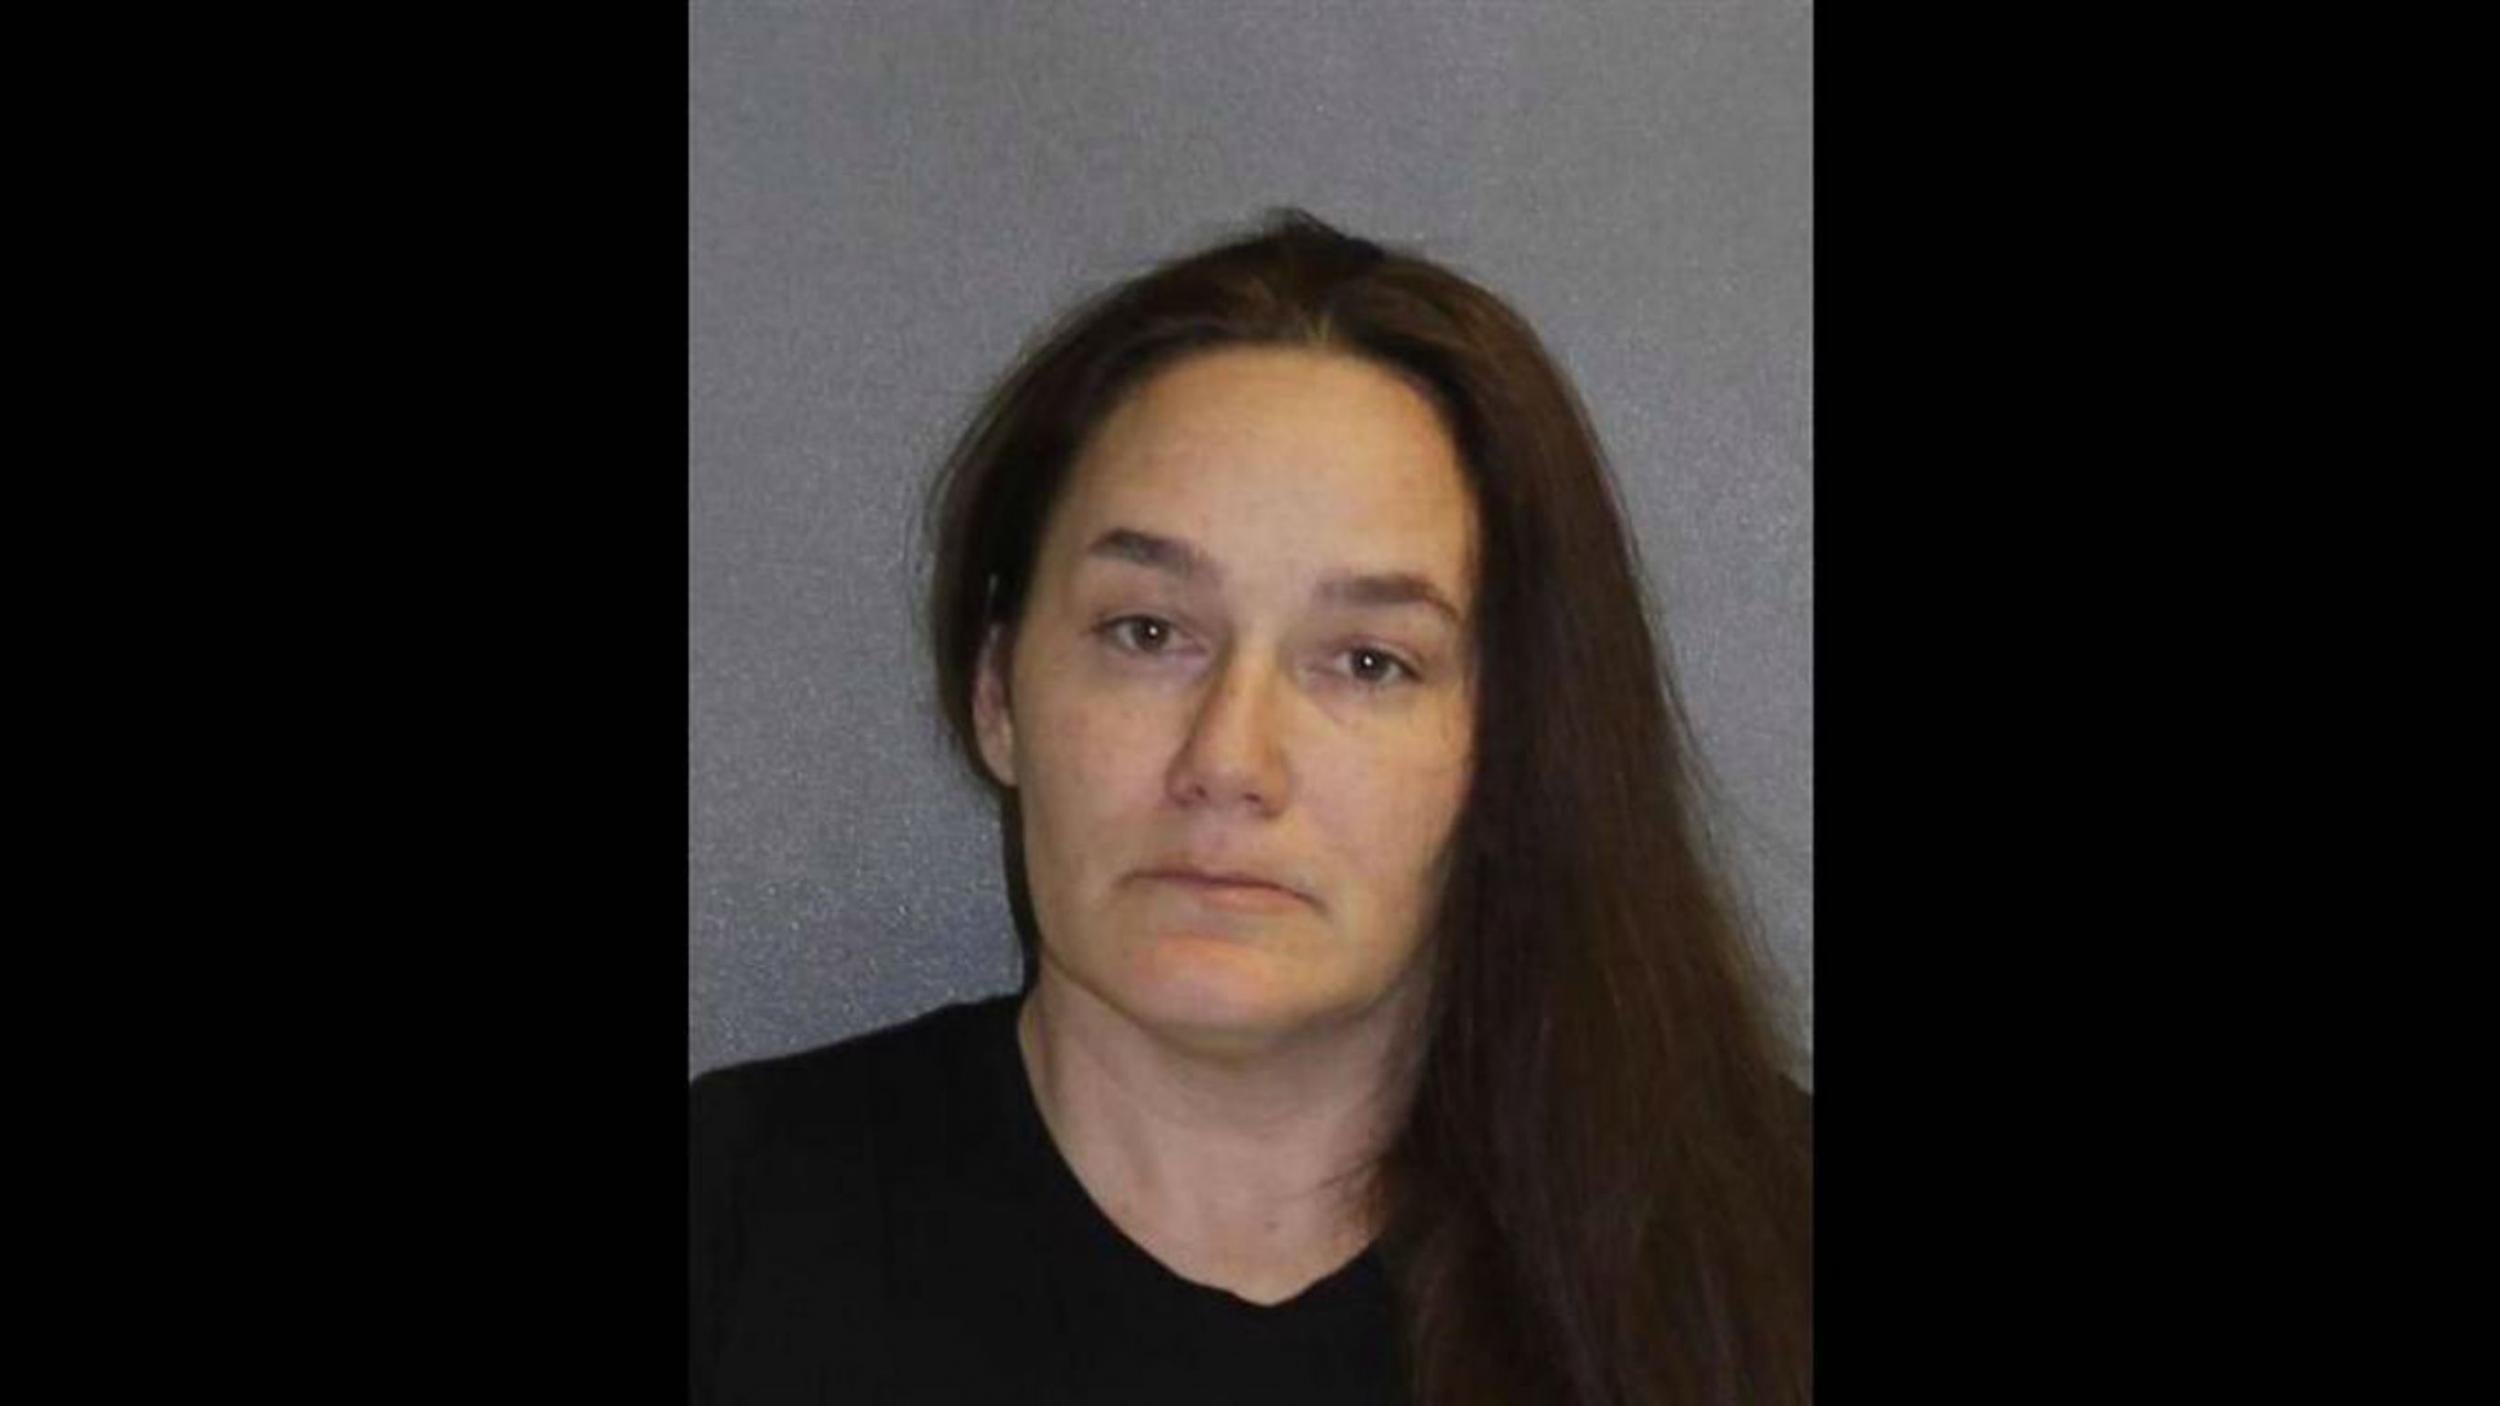 Victoria Kanger was arrested and charged with child neglect